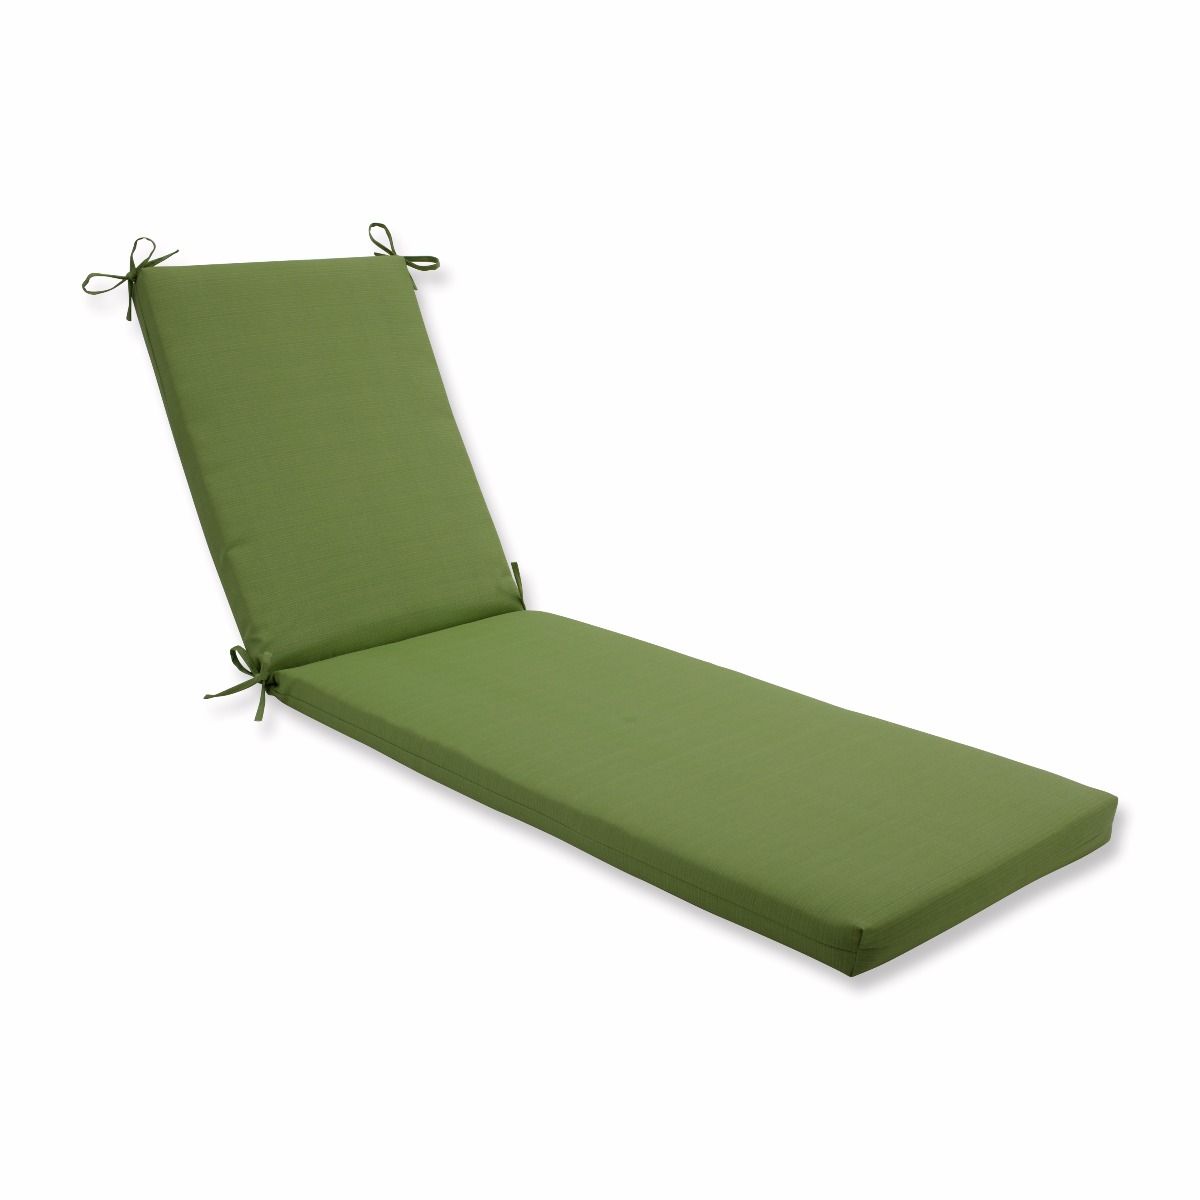 Pillow Perfect 80" Moss Green Solid Outdoor Patio Chaise Lounge Cushion with Ties